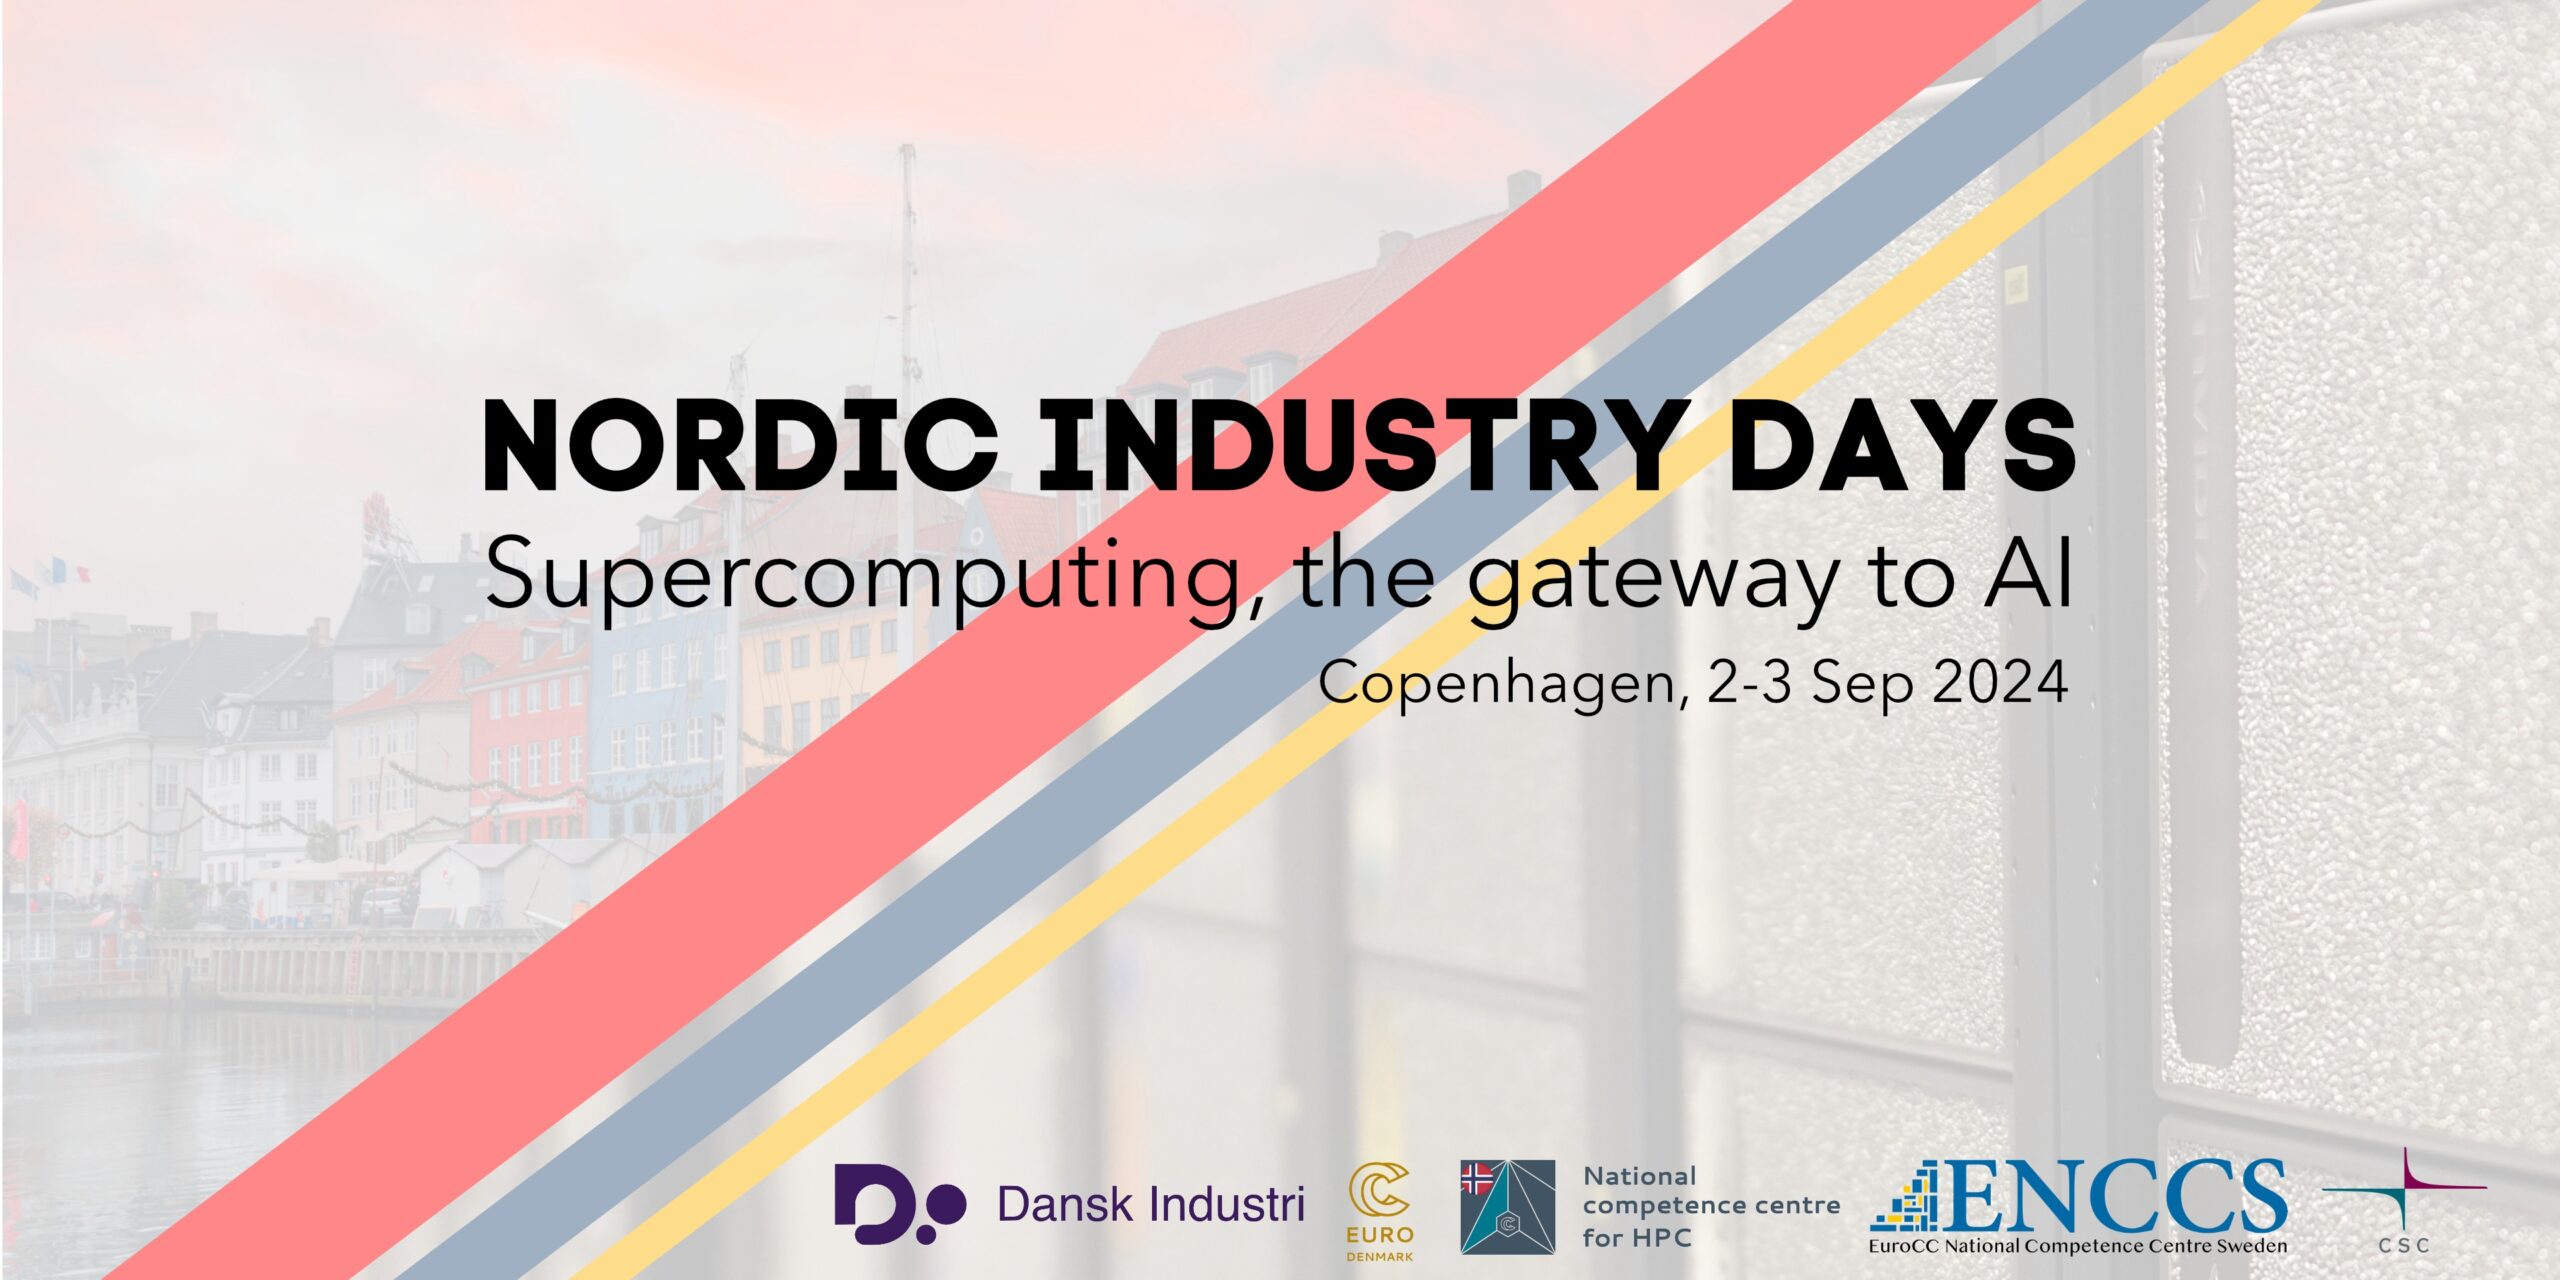 An image of Copenhagen merges with a supercomputer. A diagonal stripe through the title "Nordic Industry Days - Supercomputing the gateway to AI"